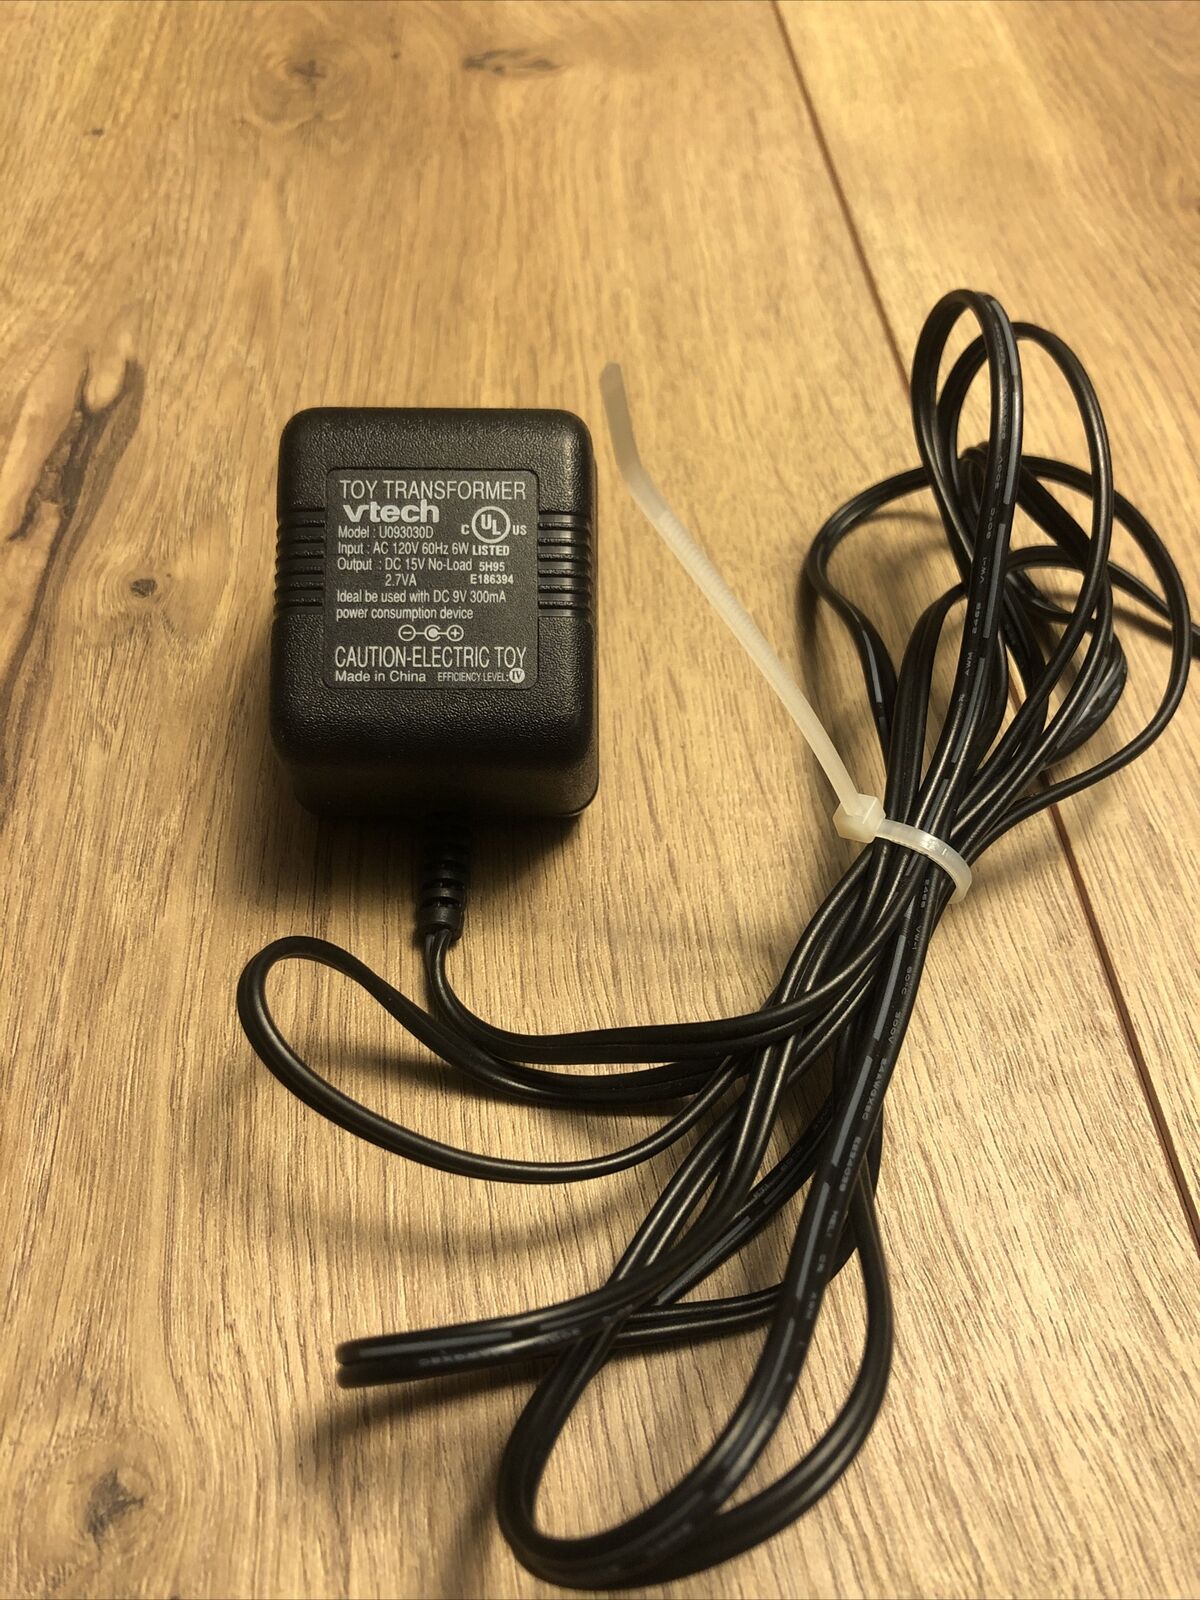 VTECH TOY TRANSFORMER U093030D AC ADAPTER OUTPUT15V DC CORD CHARGER Brand: VTech Type: AC to DC wall adapter Produ - Click Image to Close